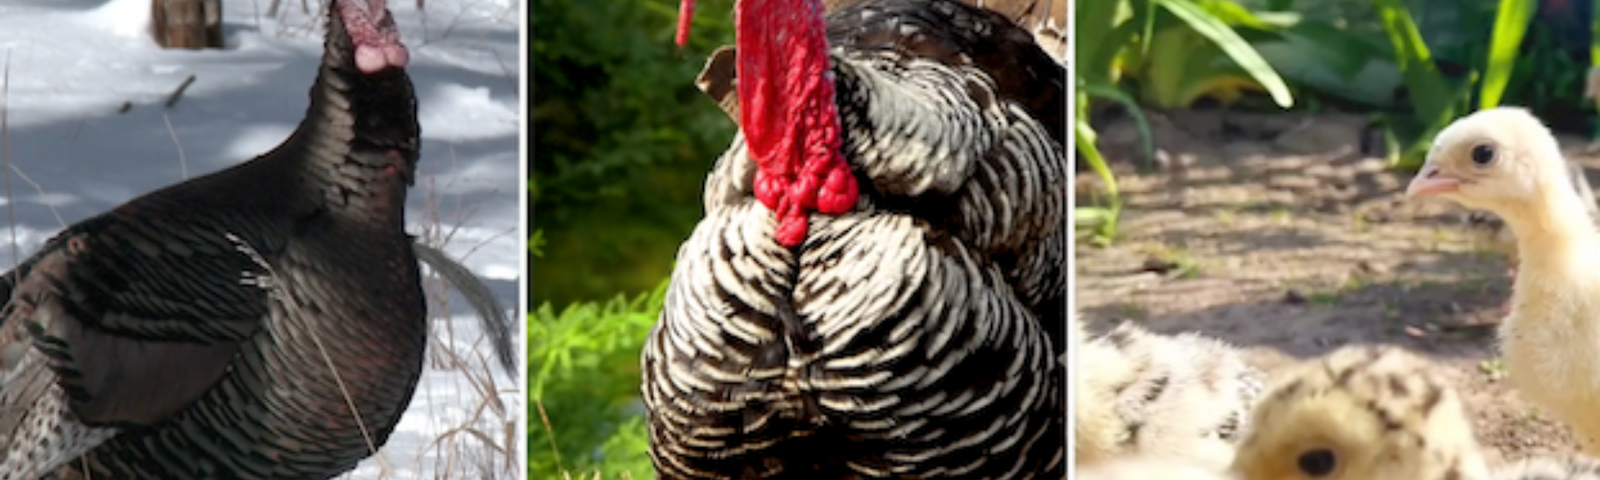 Turkey Time: How Raising Turkeys is DIFFERENT from Raising Chickens